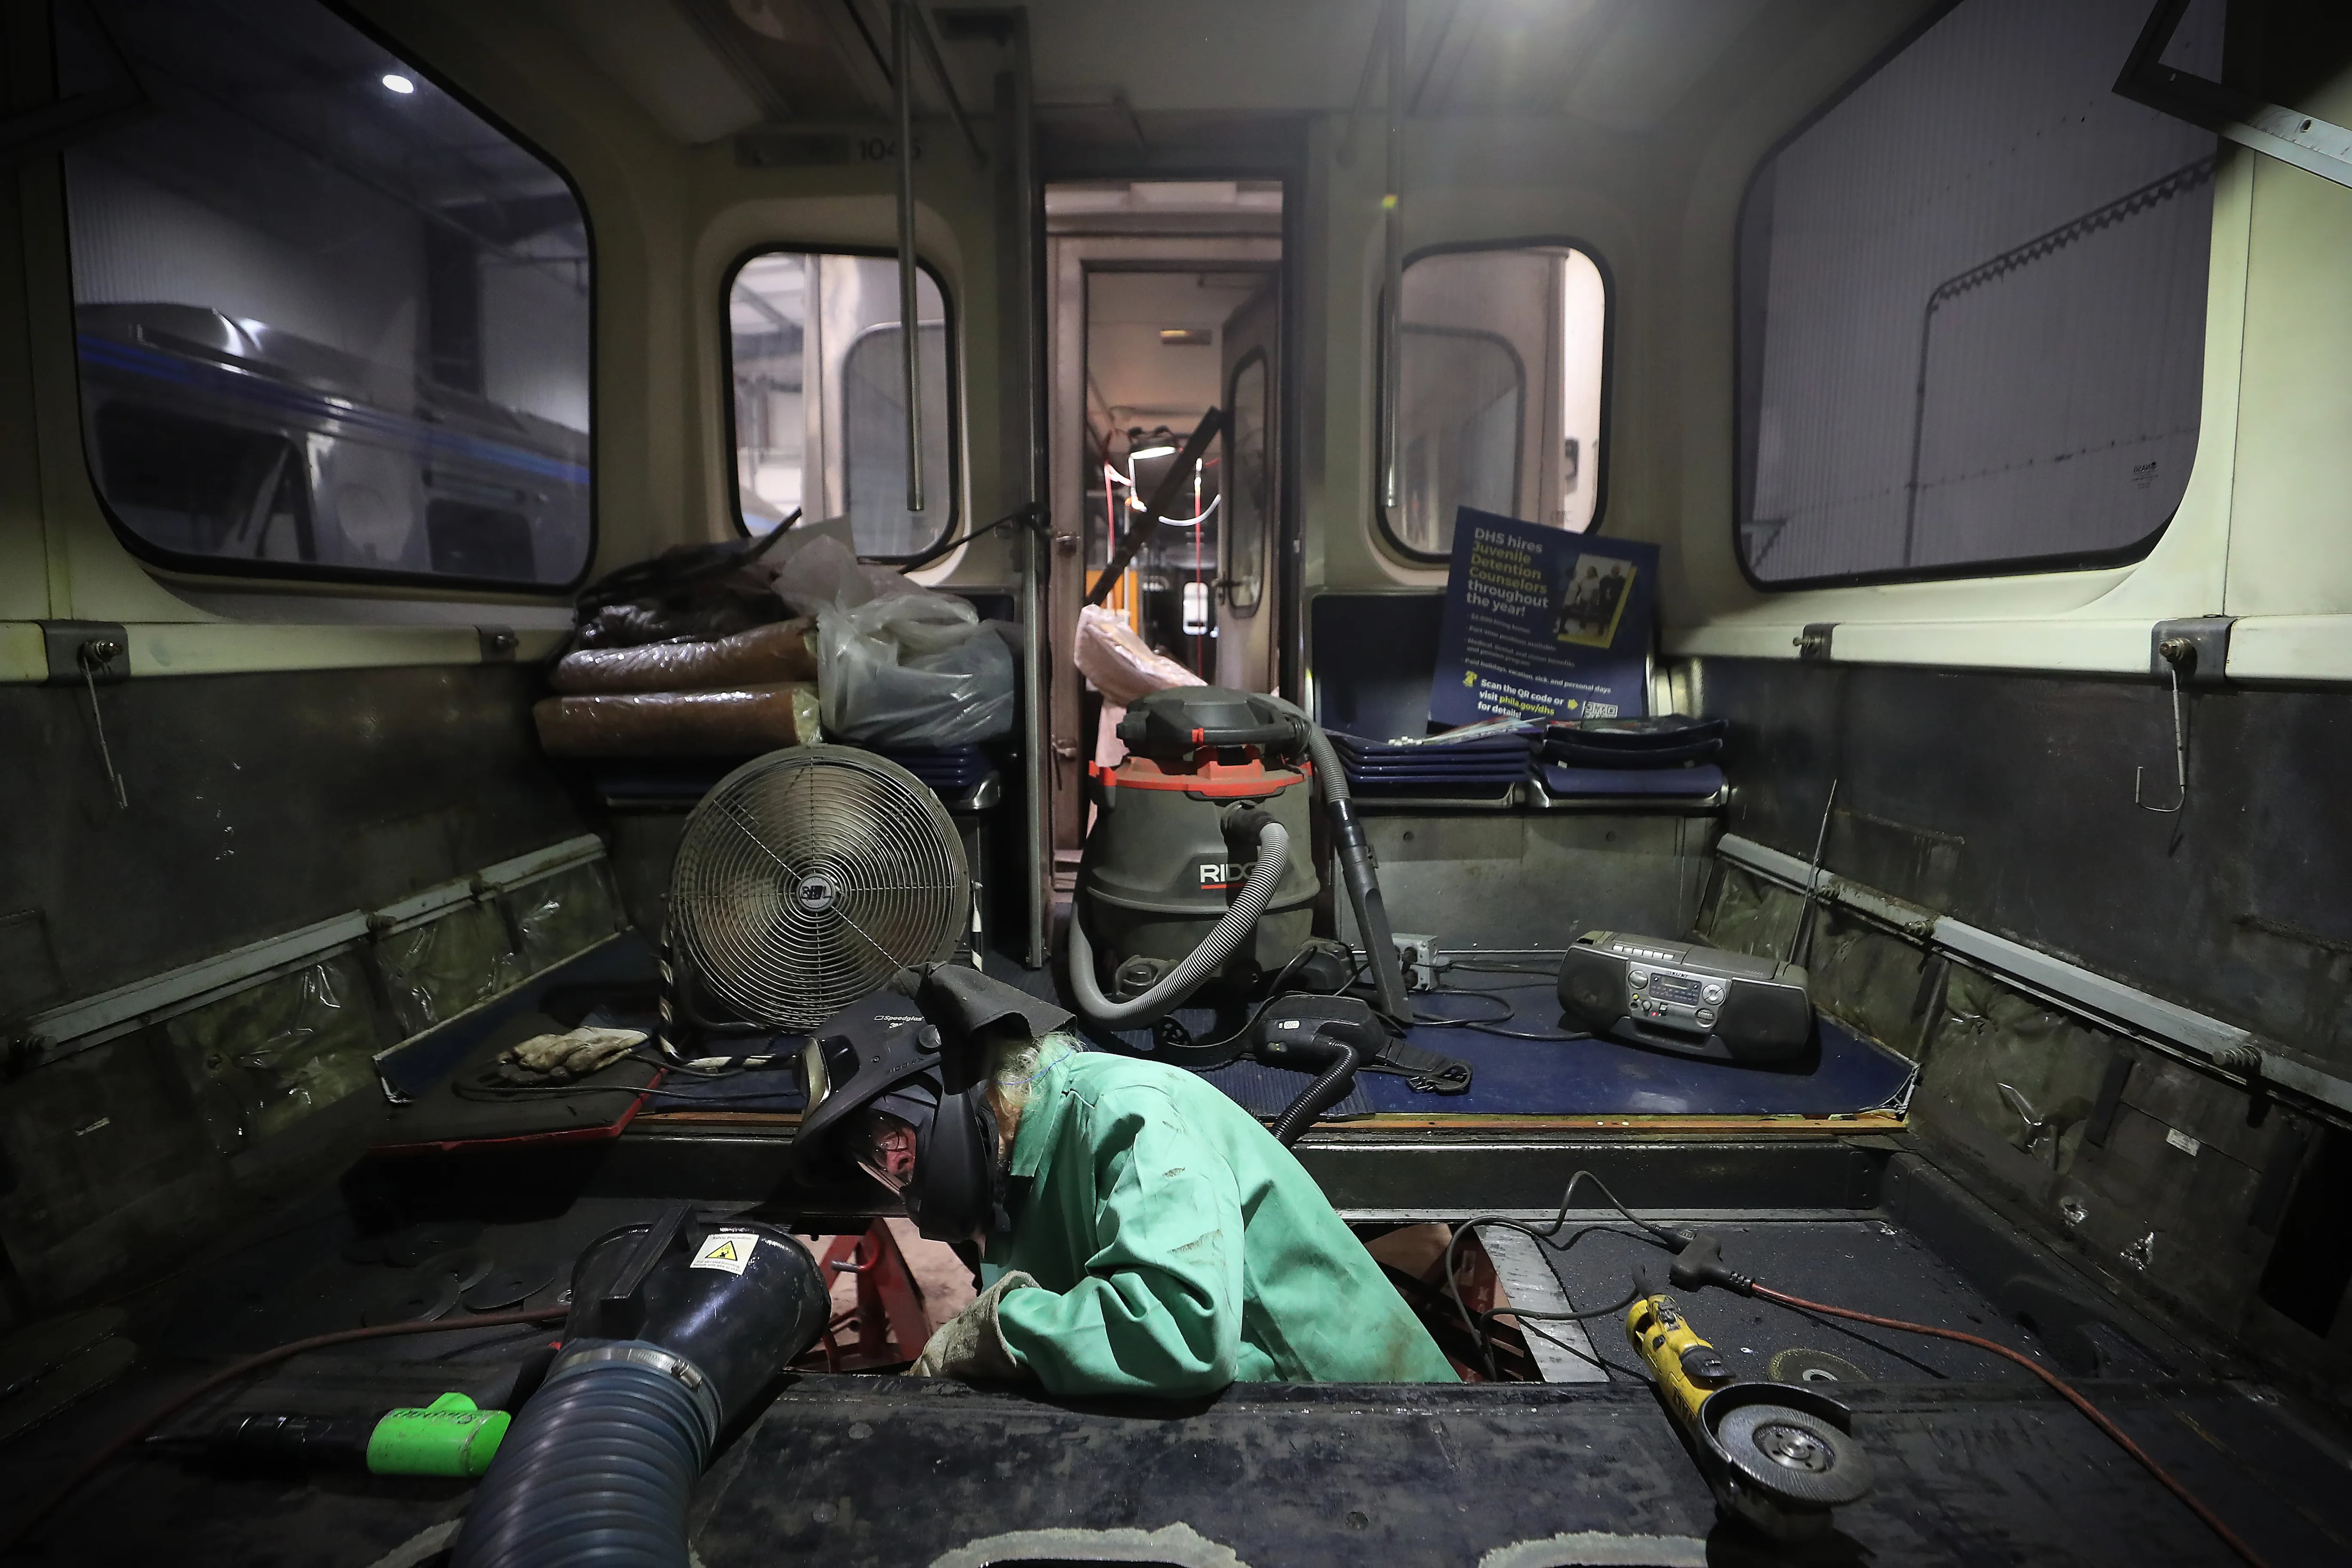 Buddy LeSage, a welder specialist for SEPTA, works on a body bolster repair on a car at SEPTA’s Market Frankford Line maintenance garage in Upper Darby.